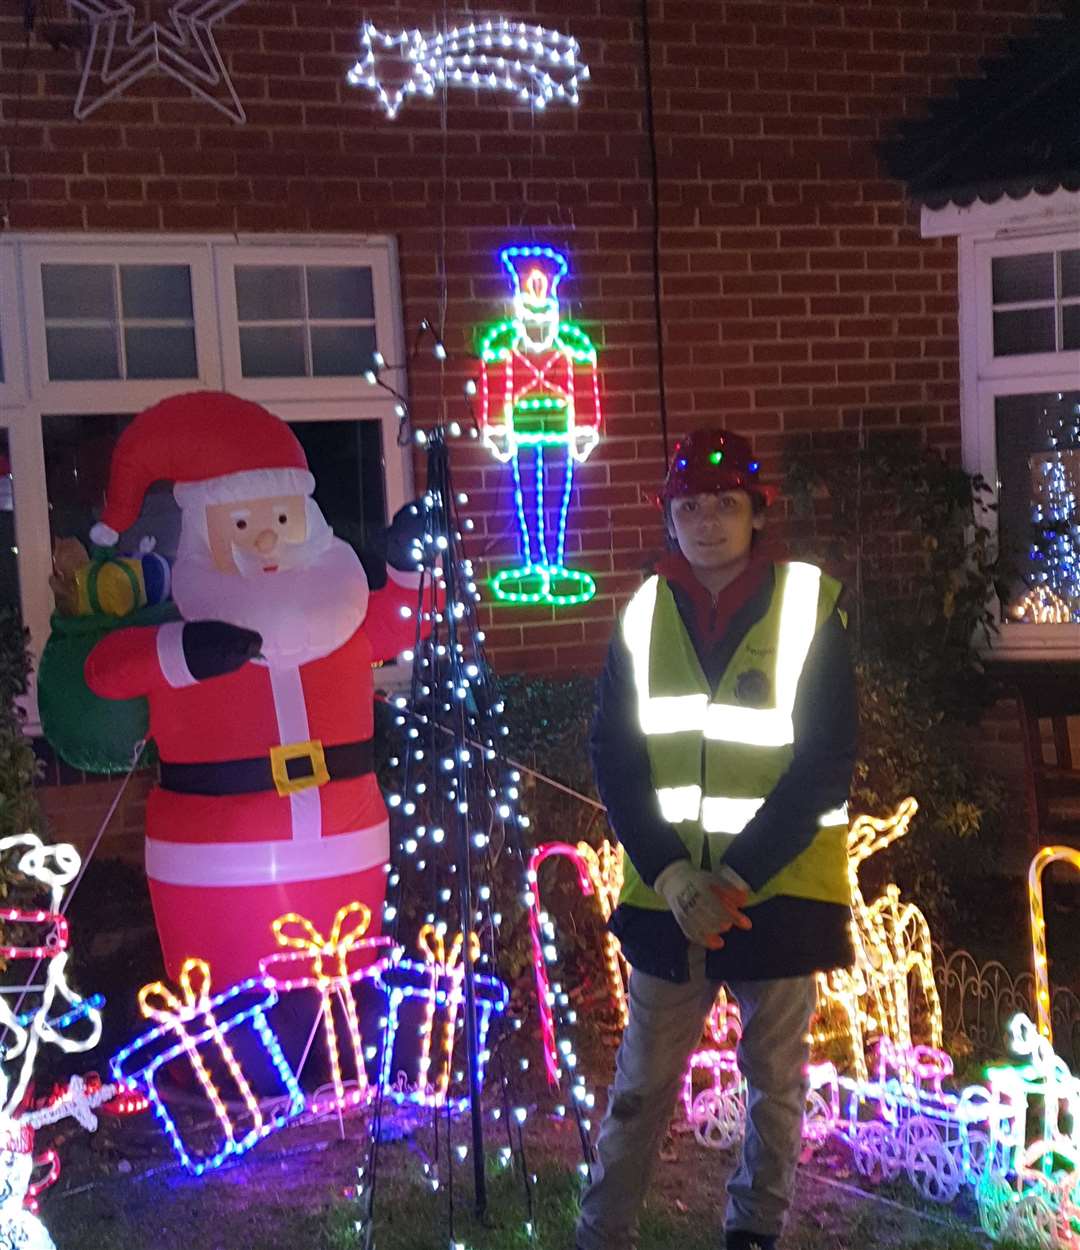 Callum Dunne has set up the festive display to raise money for Maidstone Day Centre.